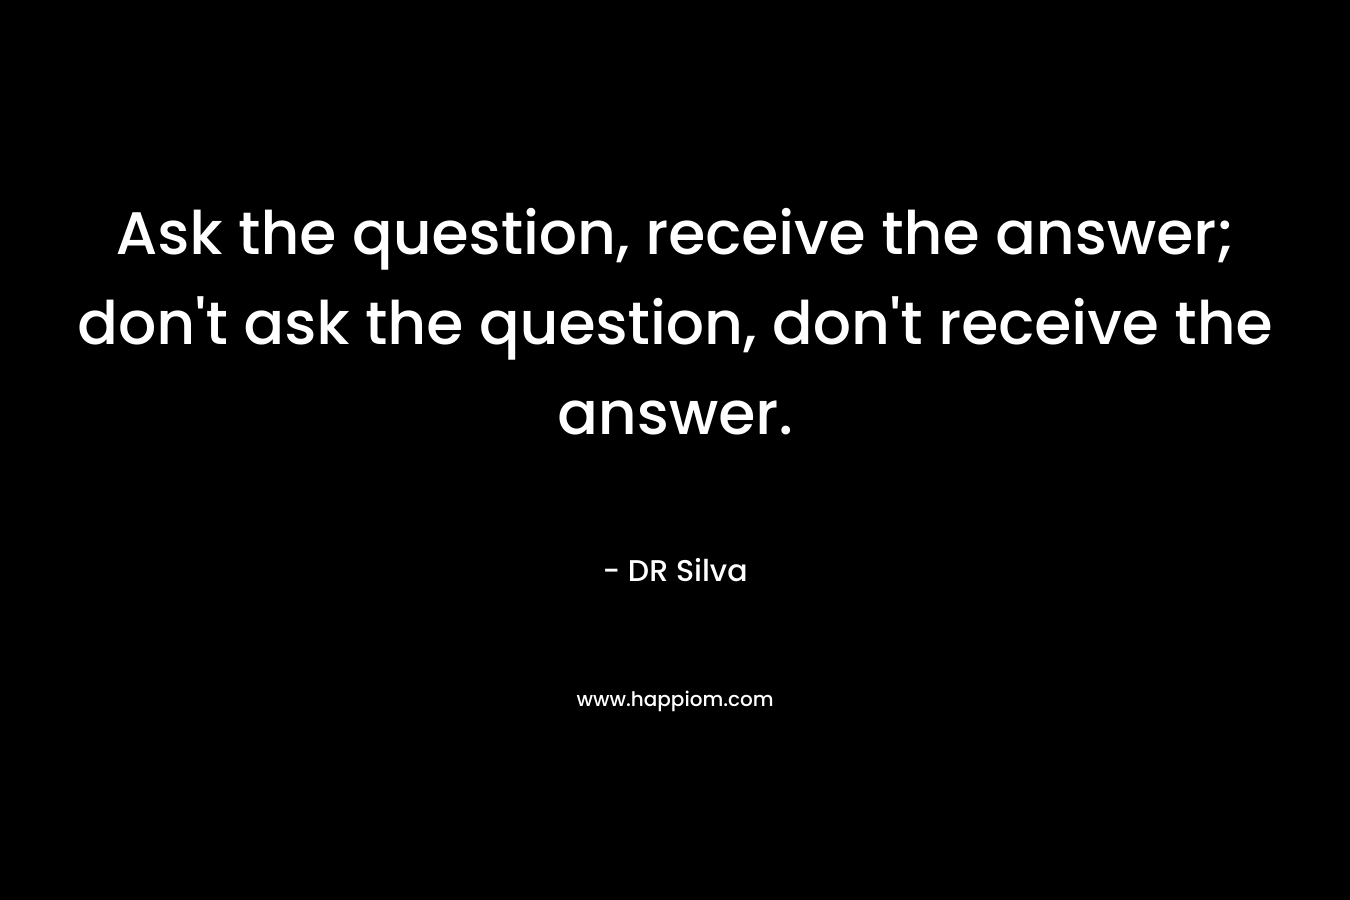 Ask the question, receive the answer; don't ask the question, don't receive the answer.